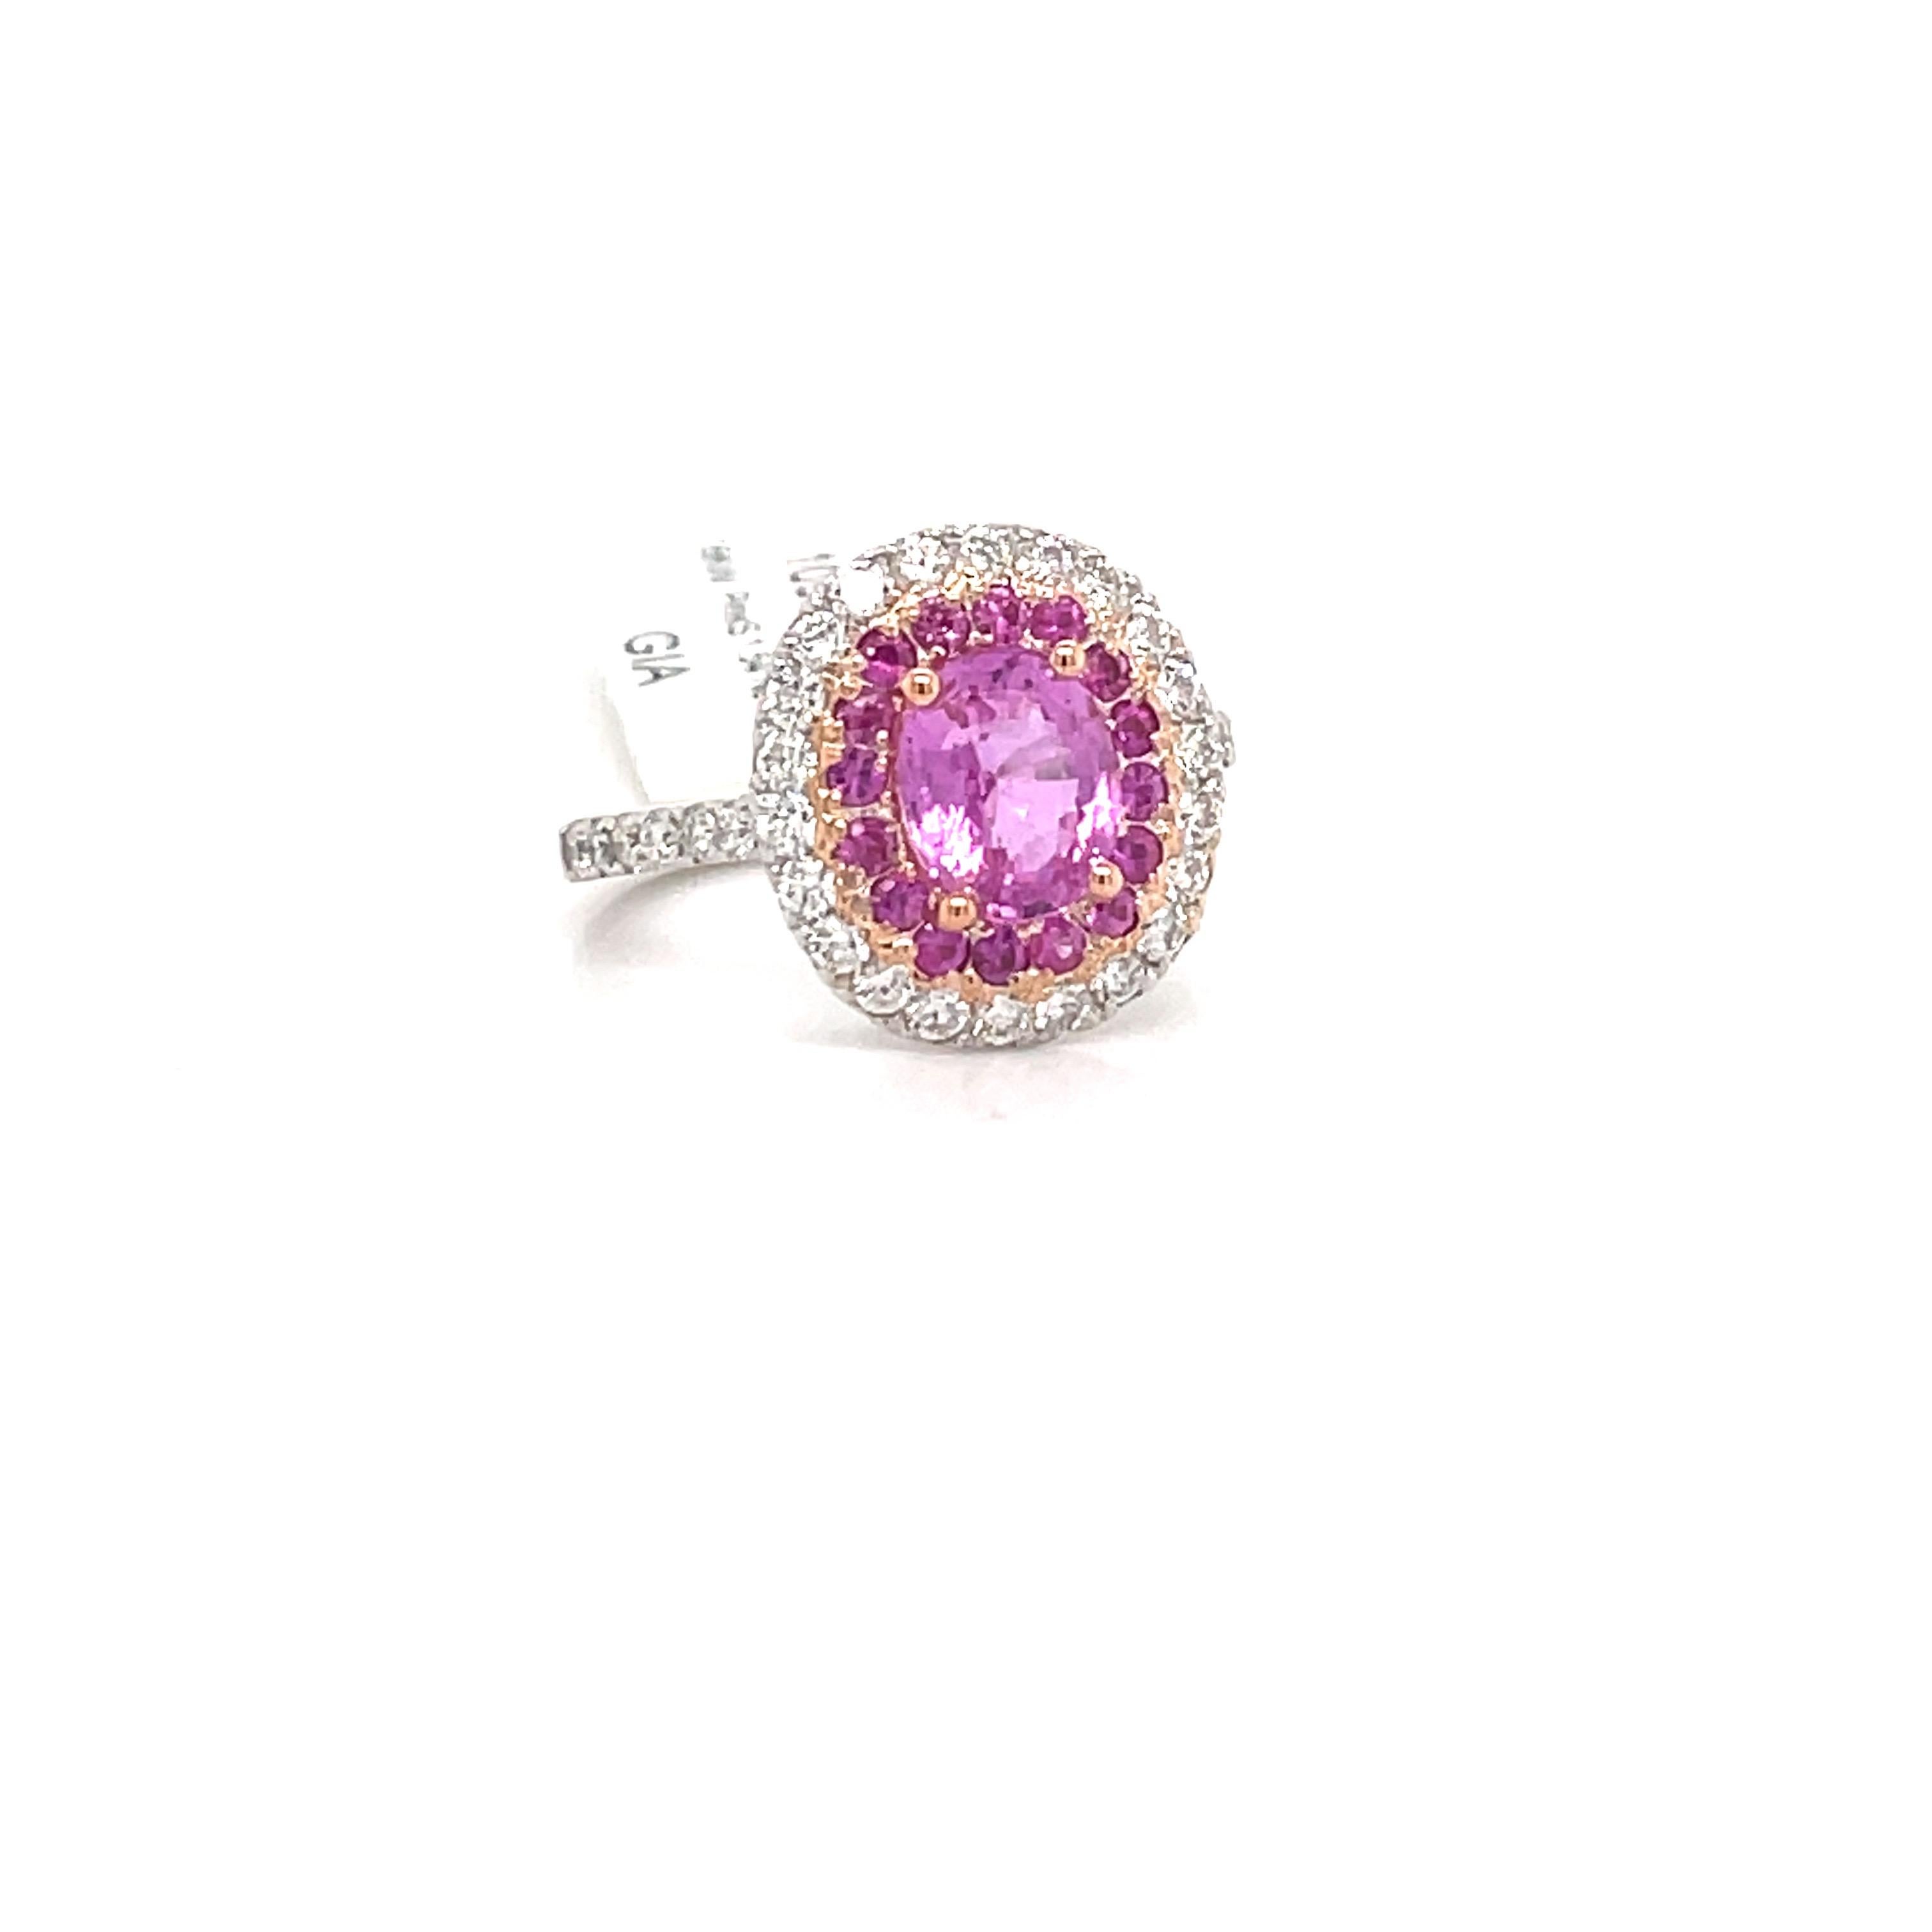 GIA Certified ring featuring one pink oval Sapphire weighing 1.54 carats flanked with a pink sapphire and diamond halo weighing 0.73 carats, crafted in 18k white gold. 